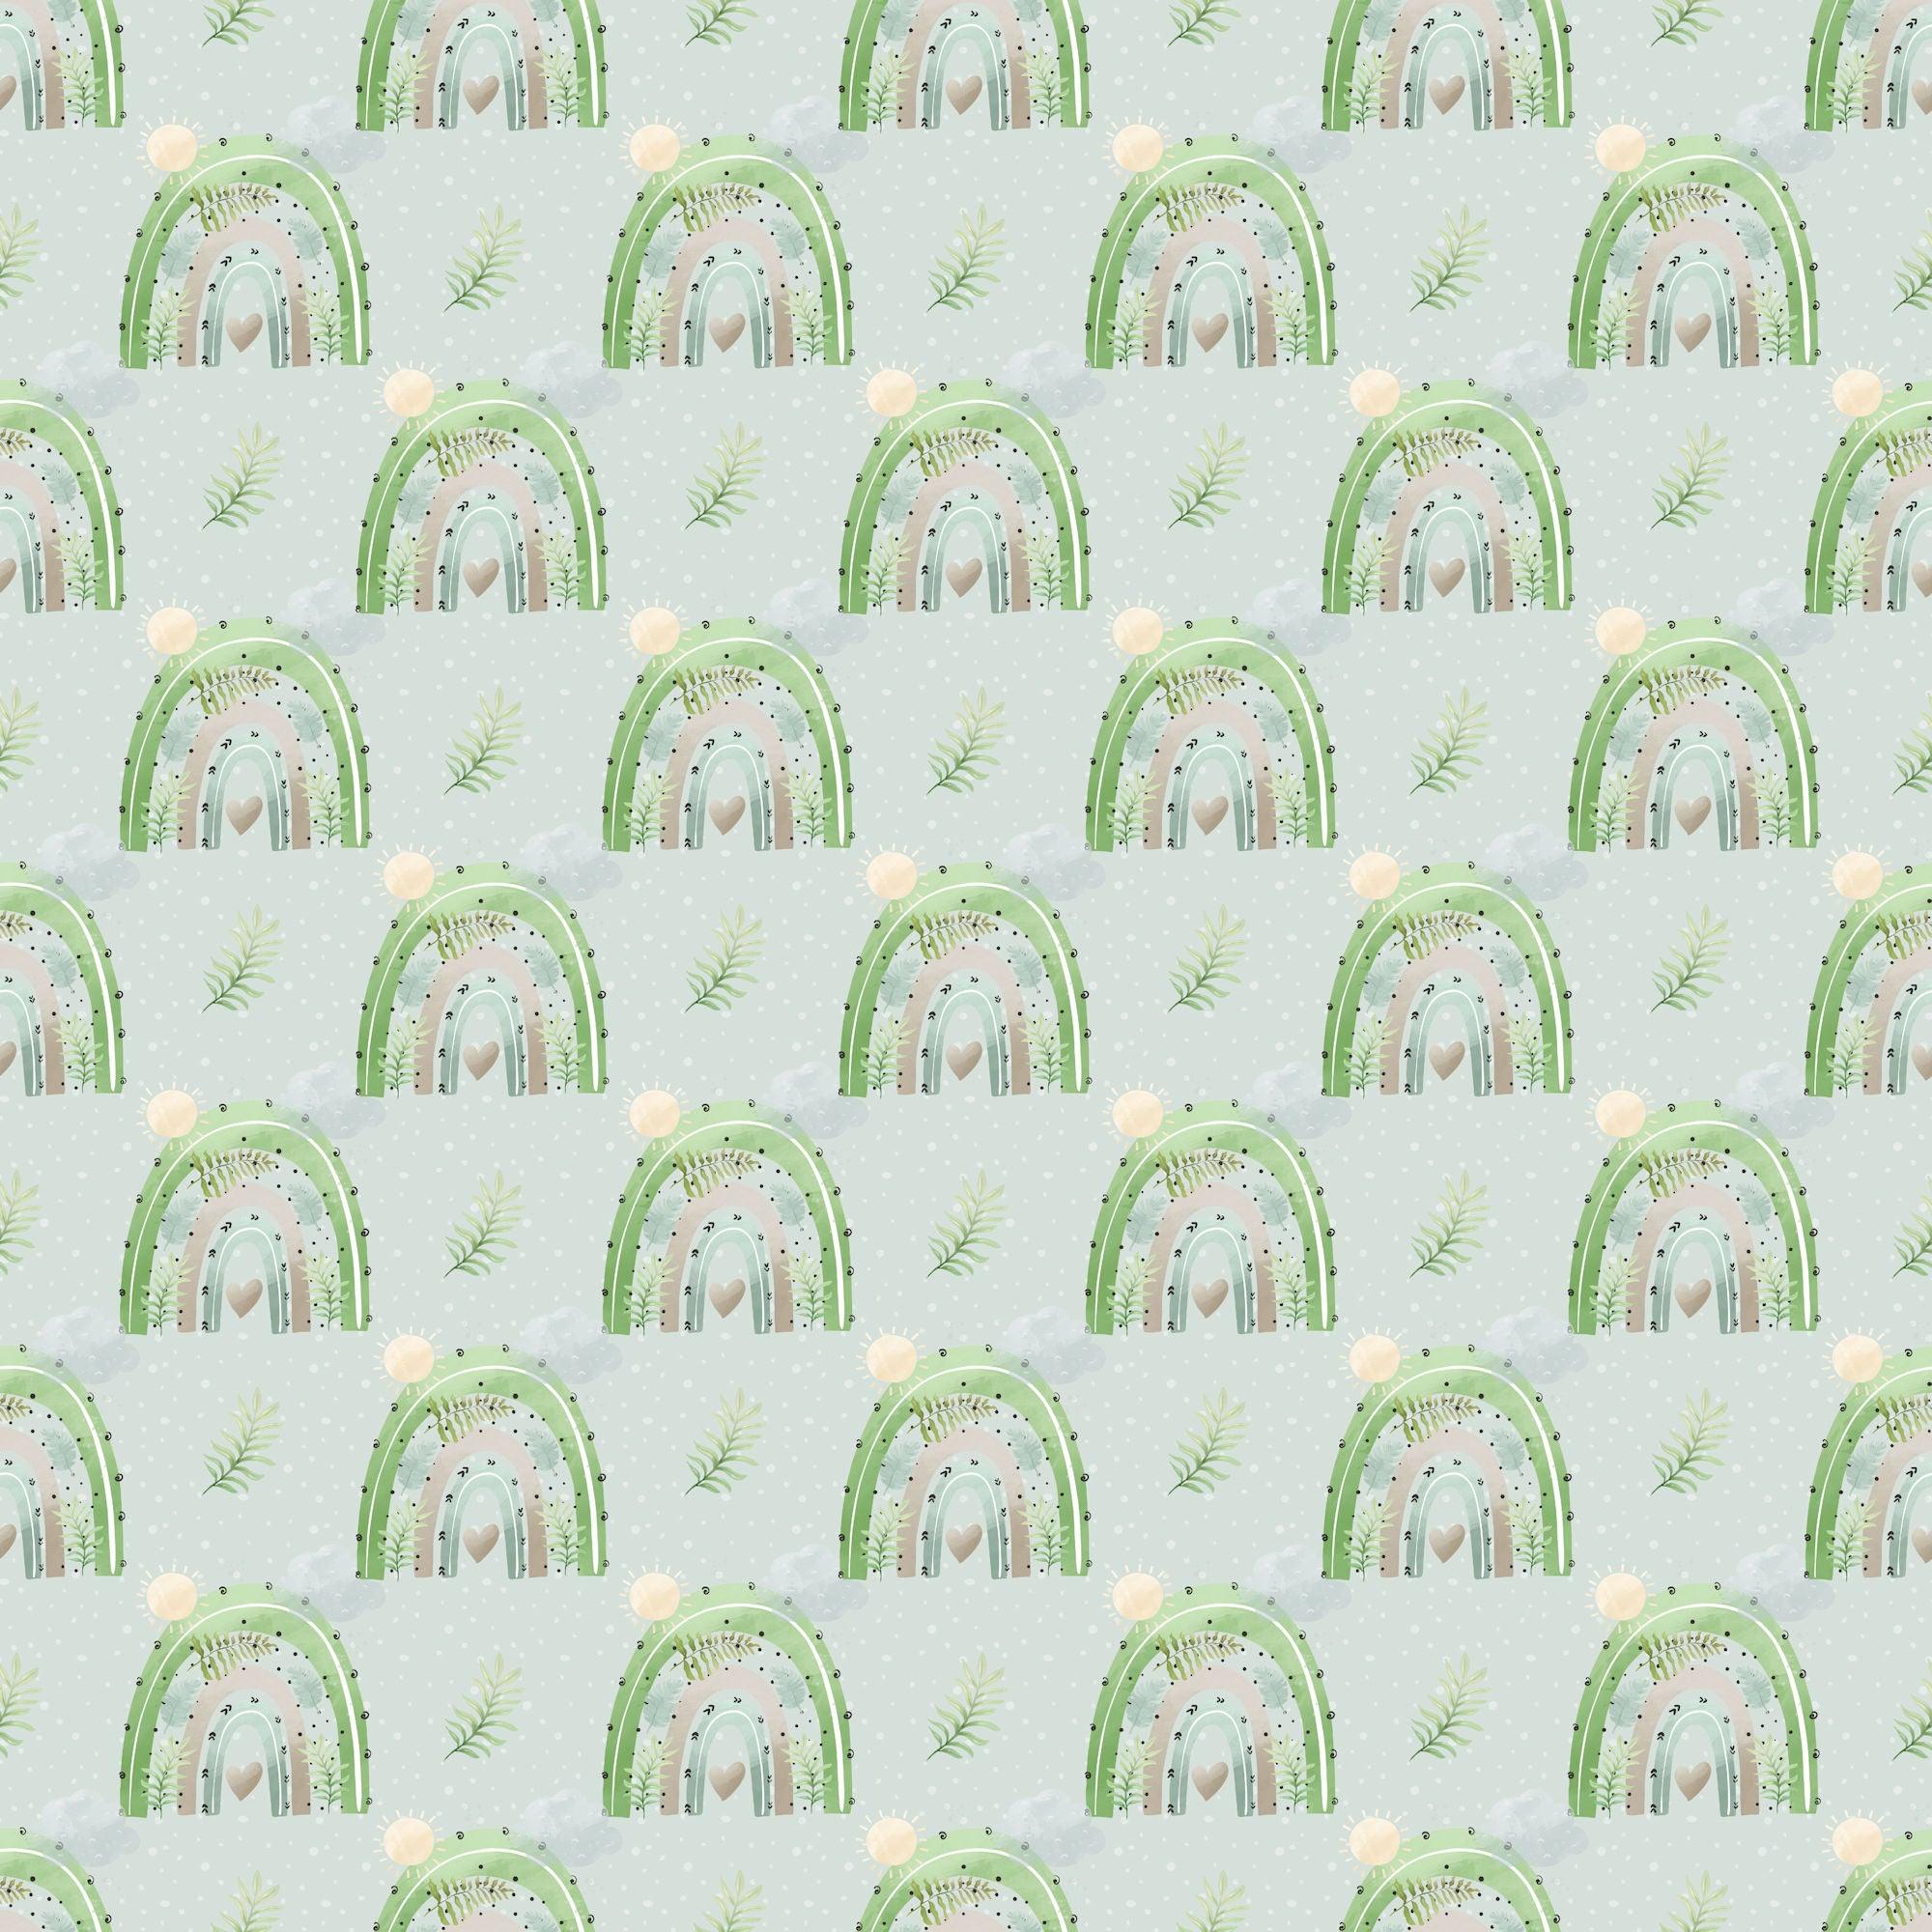 Baby Elephant Collection Stripes 12 x 12 Double-Sided Scrapbook Paper by SSC Designs - Scrapbook Supply Companies